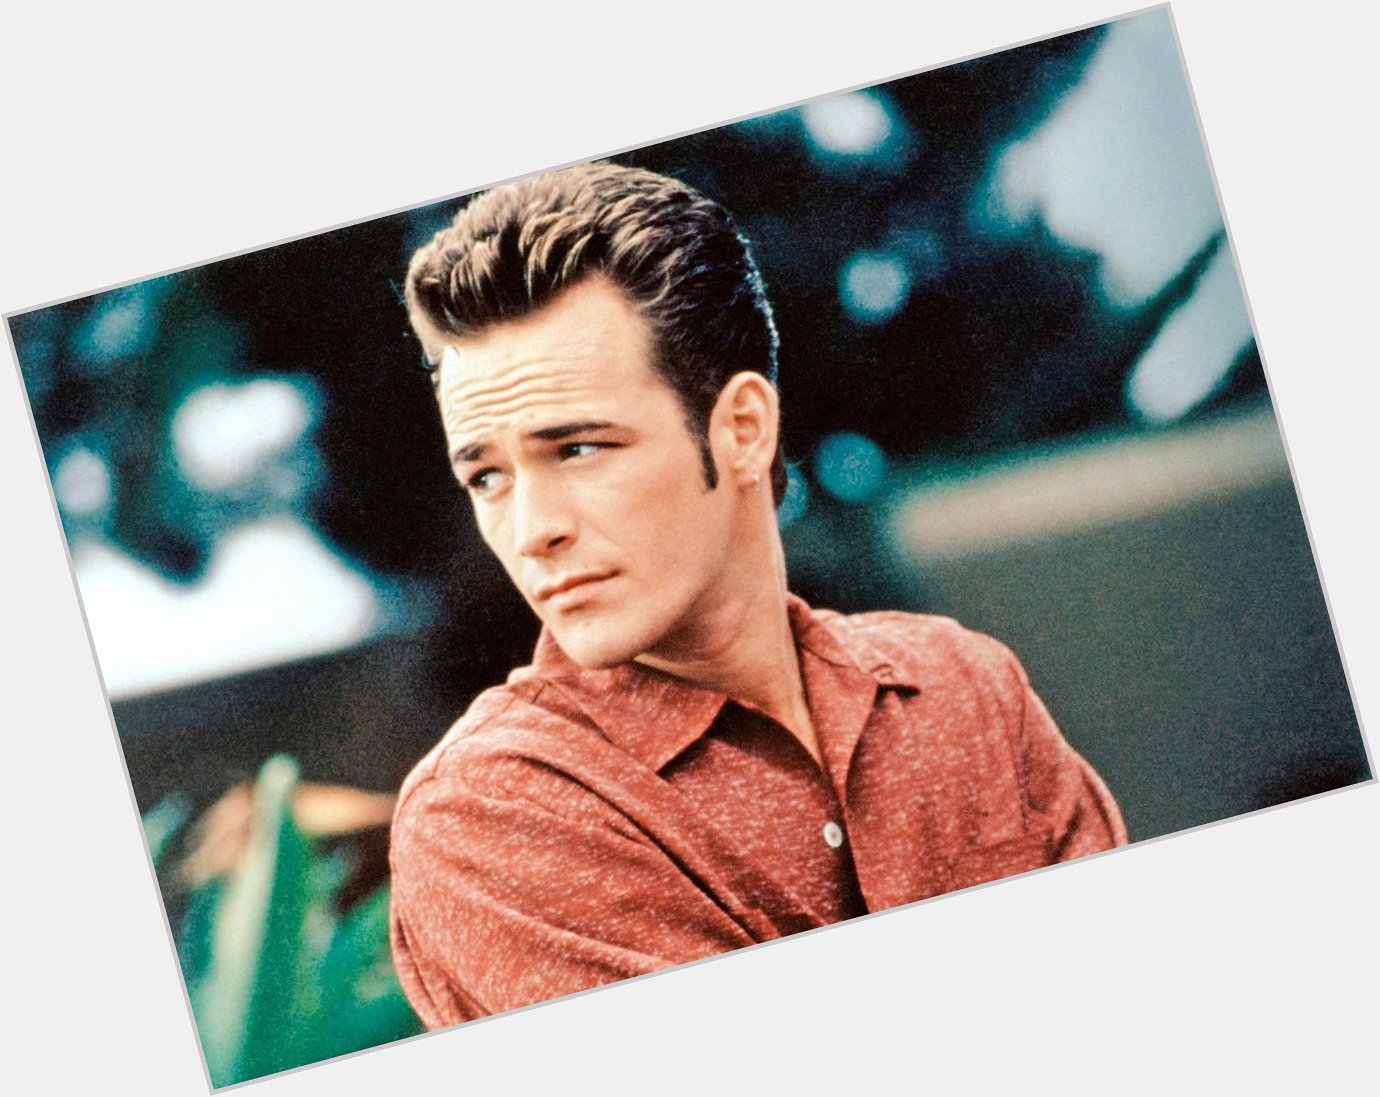 Happy birthday to Luke Perry on what would have been his 54th birthday. We miss you!! 